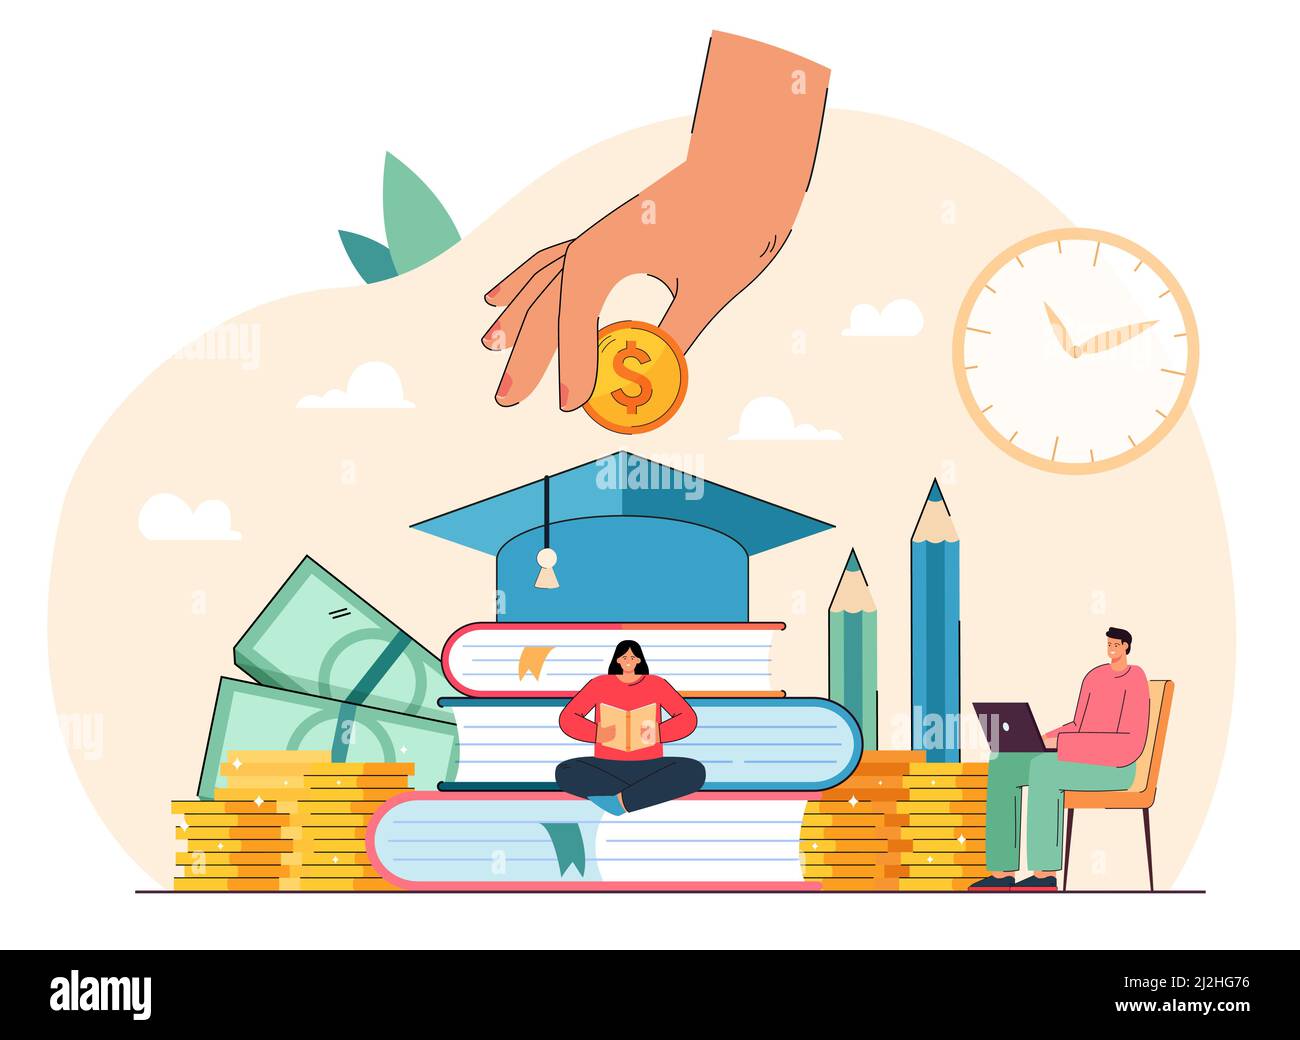 Tiny students sitting near books getting university degree and paying money. Education business flat vector illustration. College scholarship, finance Stock Vector